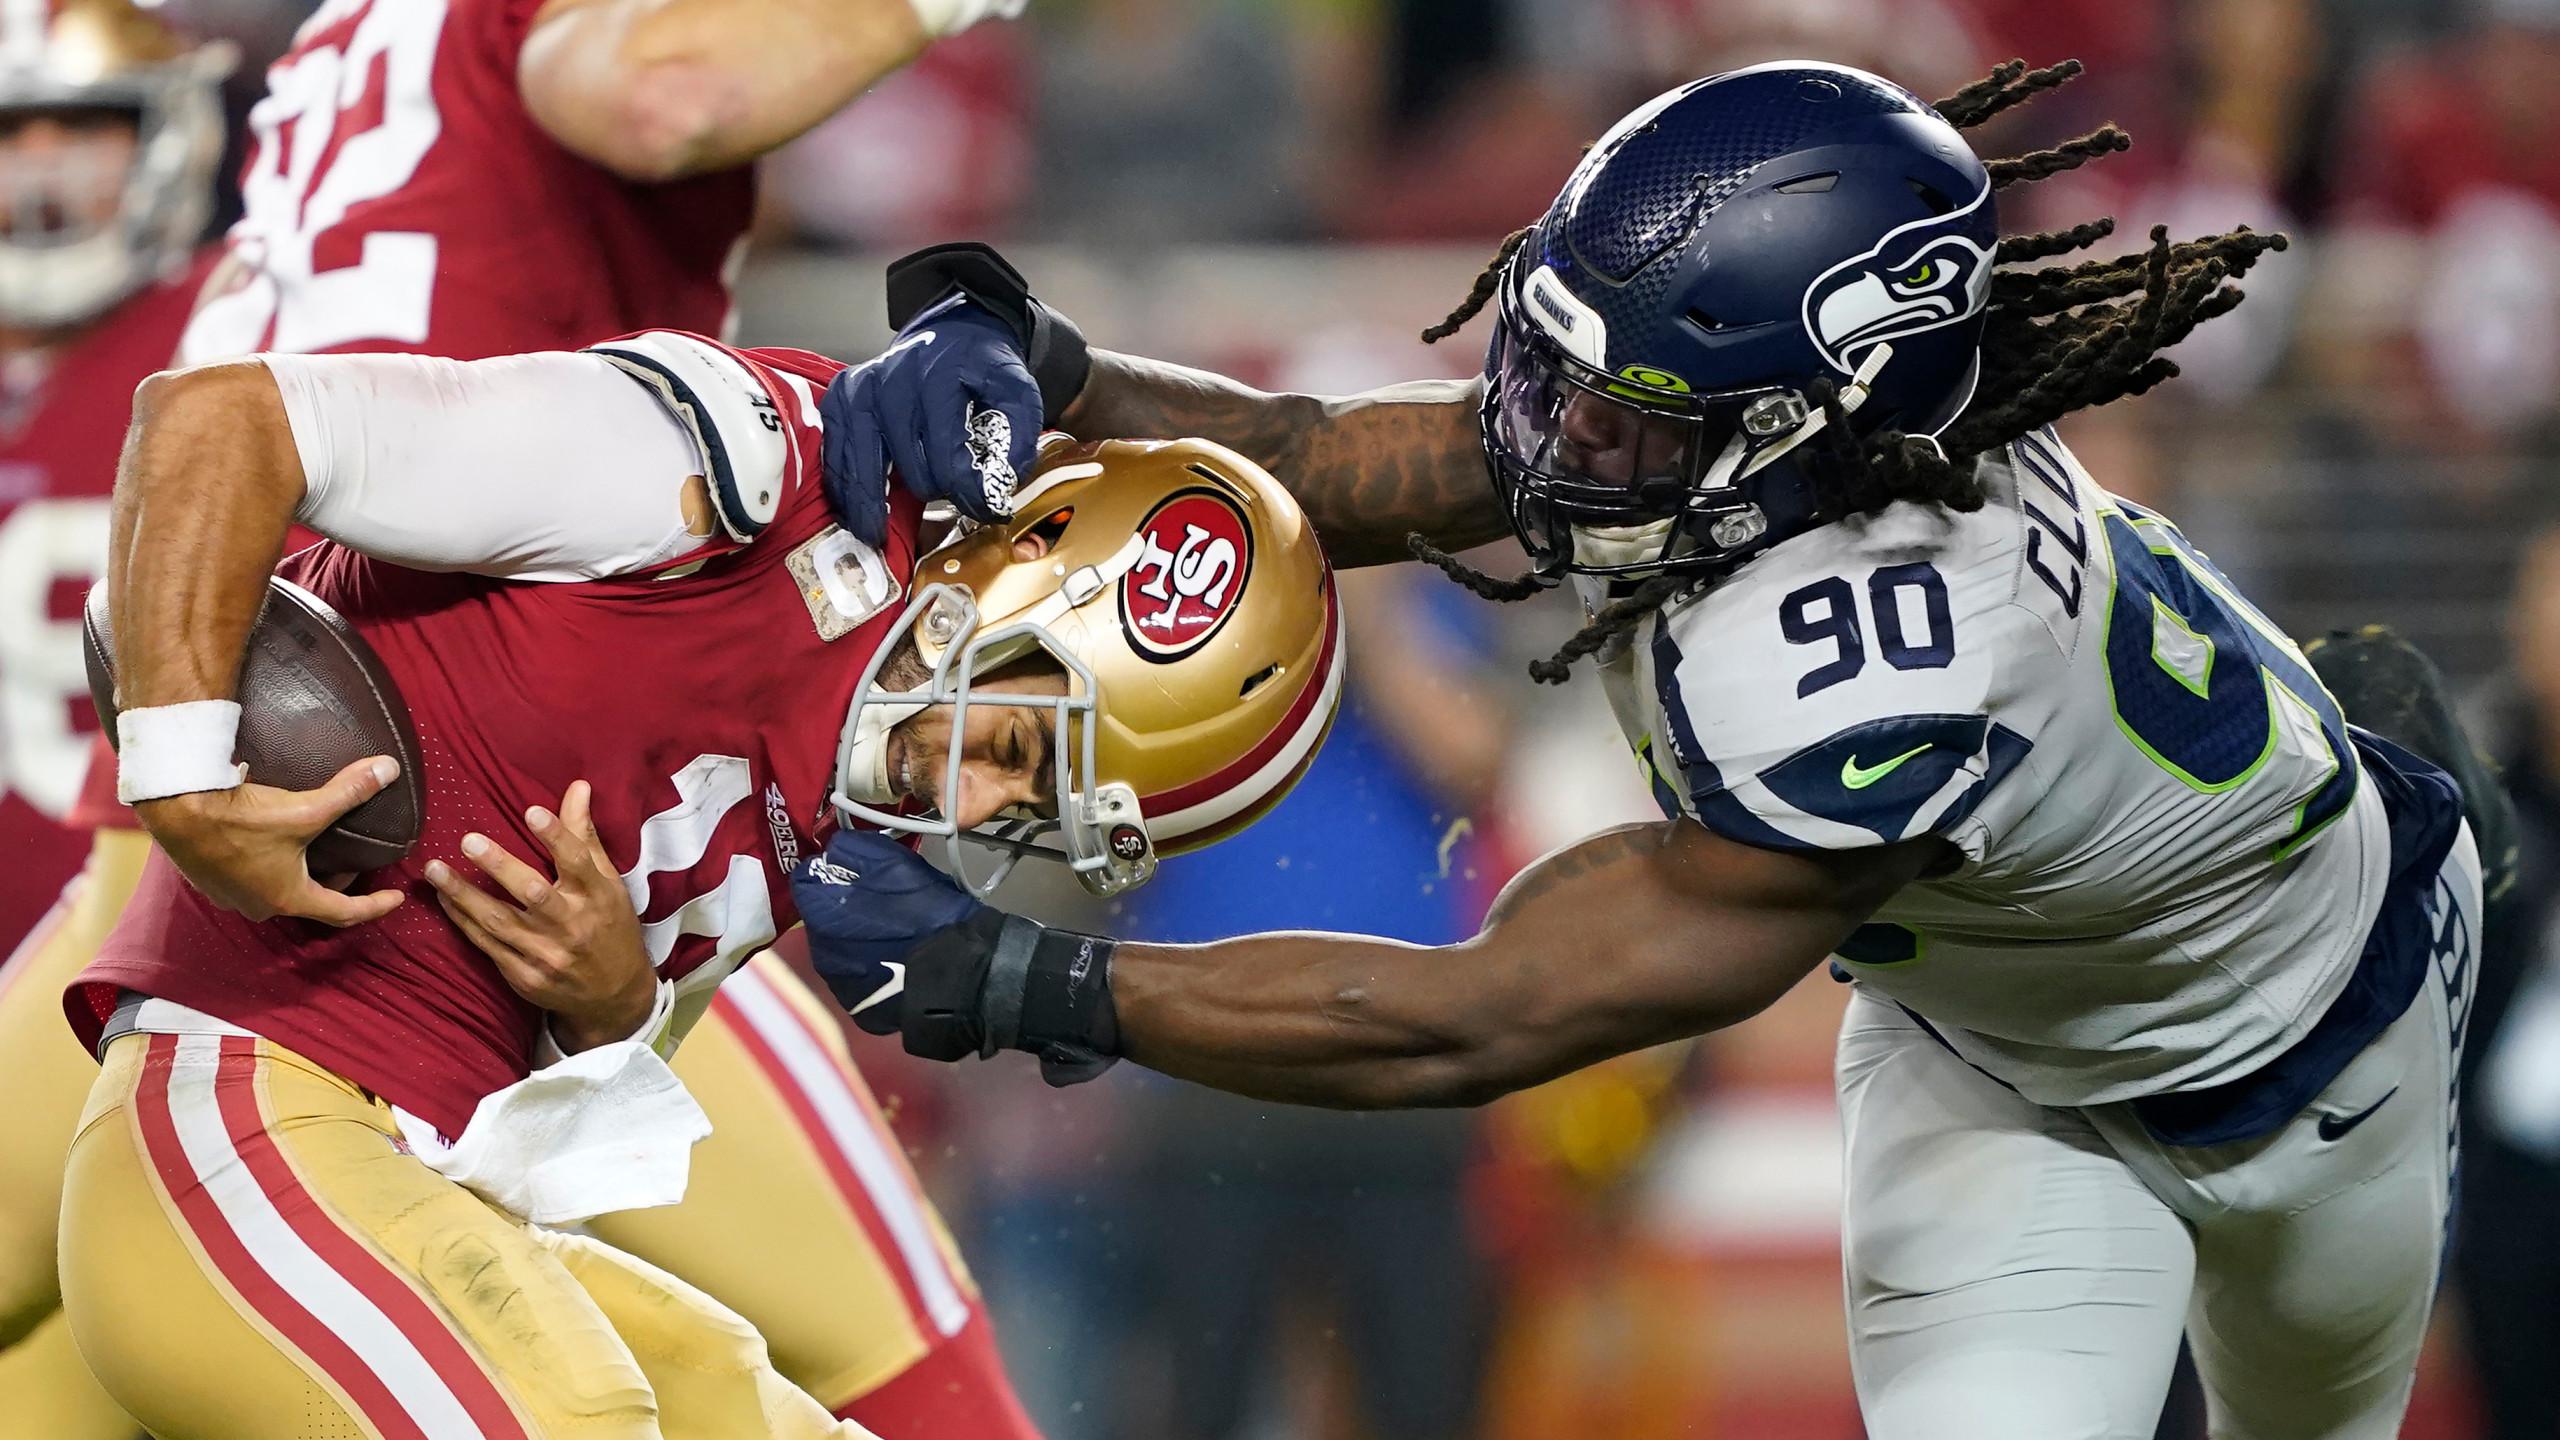 Mistakes doom 49ers and create tight NFC West race